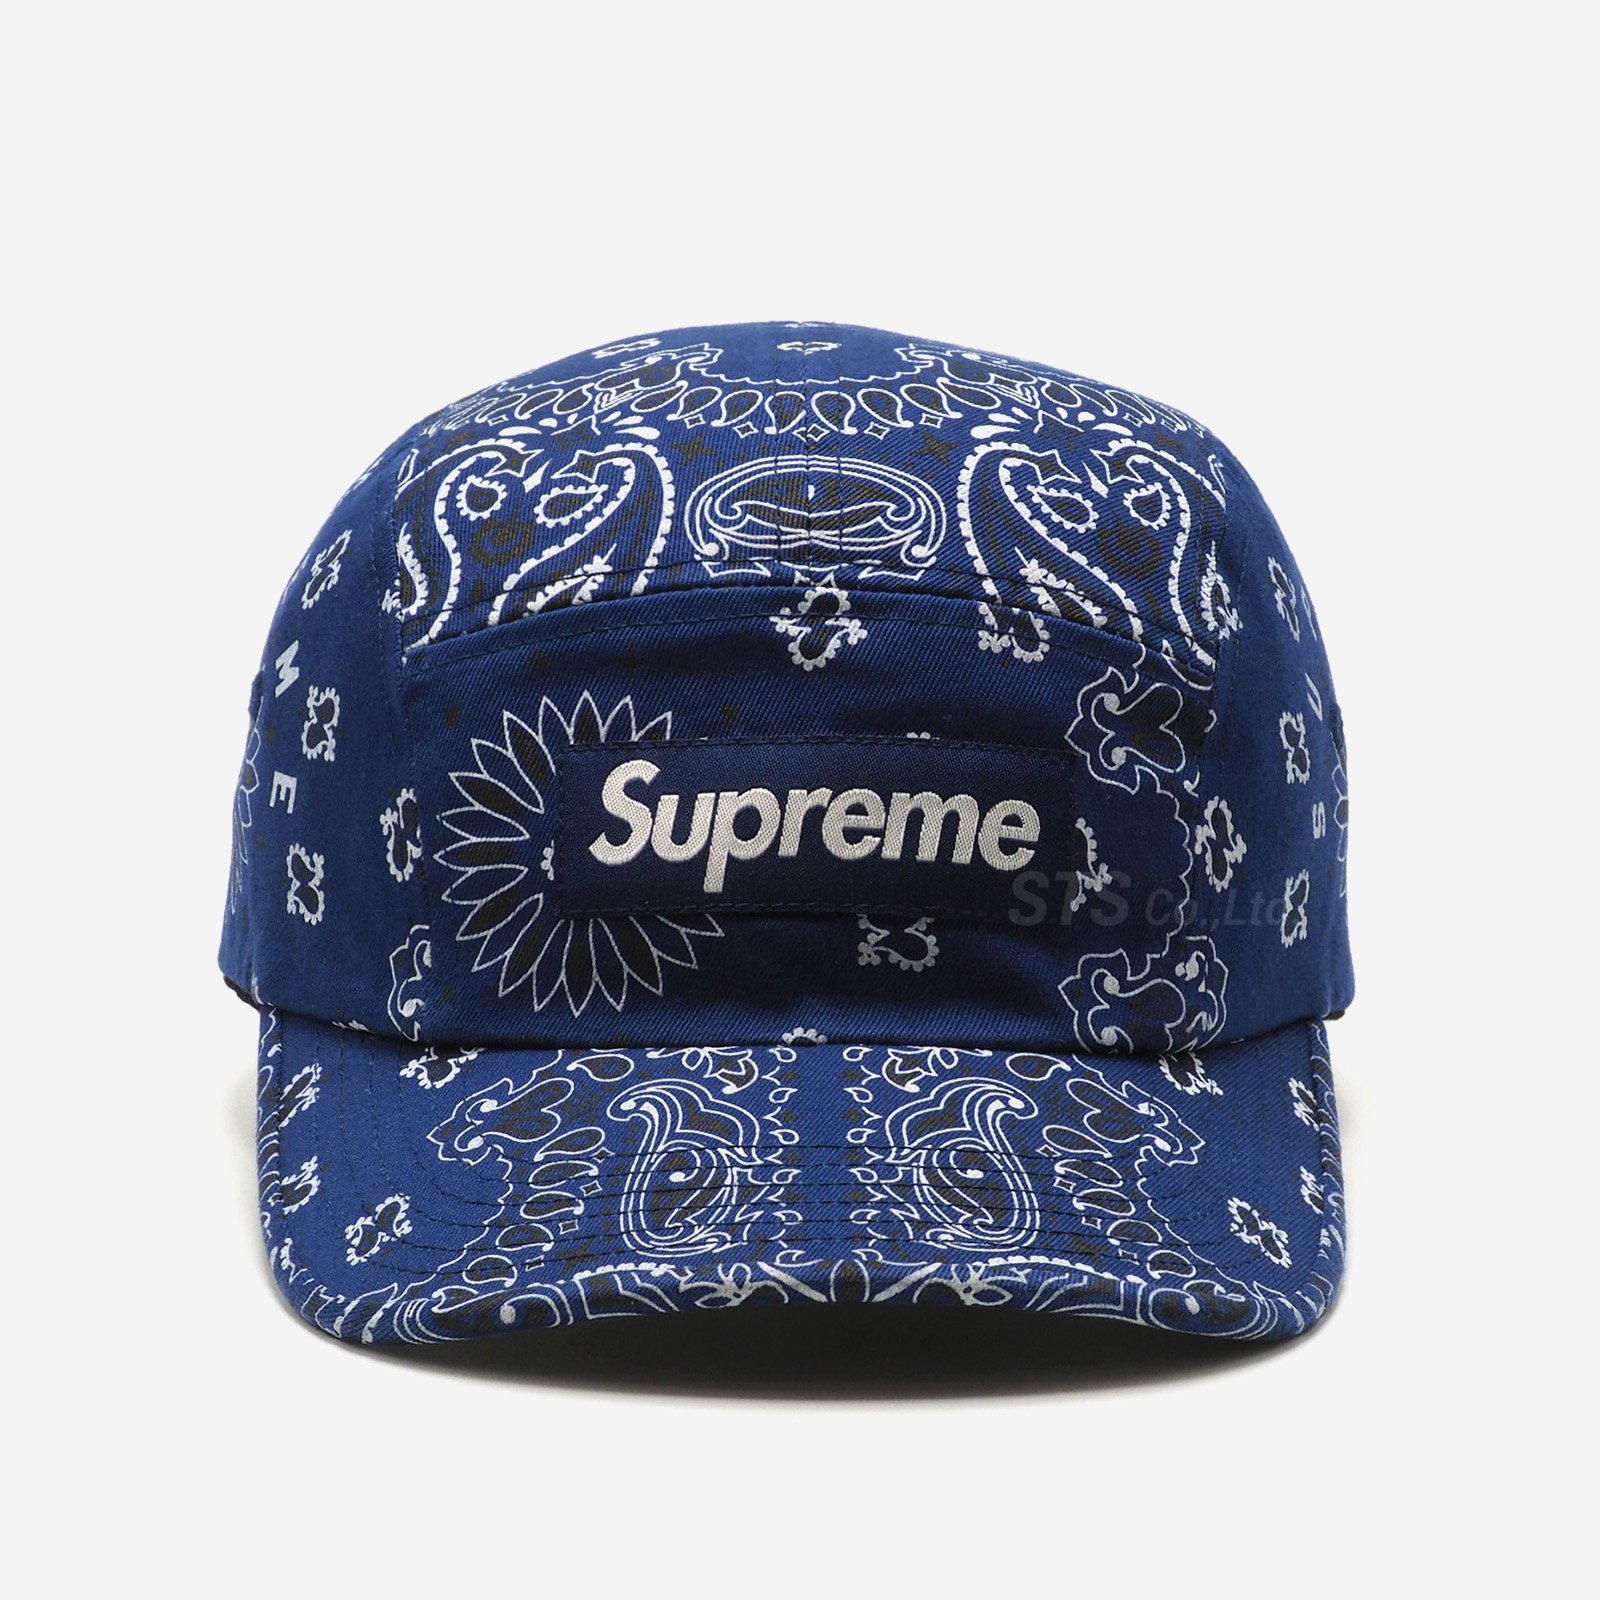 Supreme Floral Camp Cap 初期 希少 2003ss A1 - キャップ